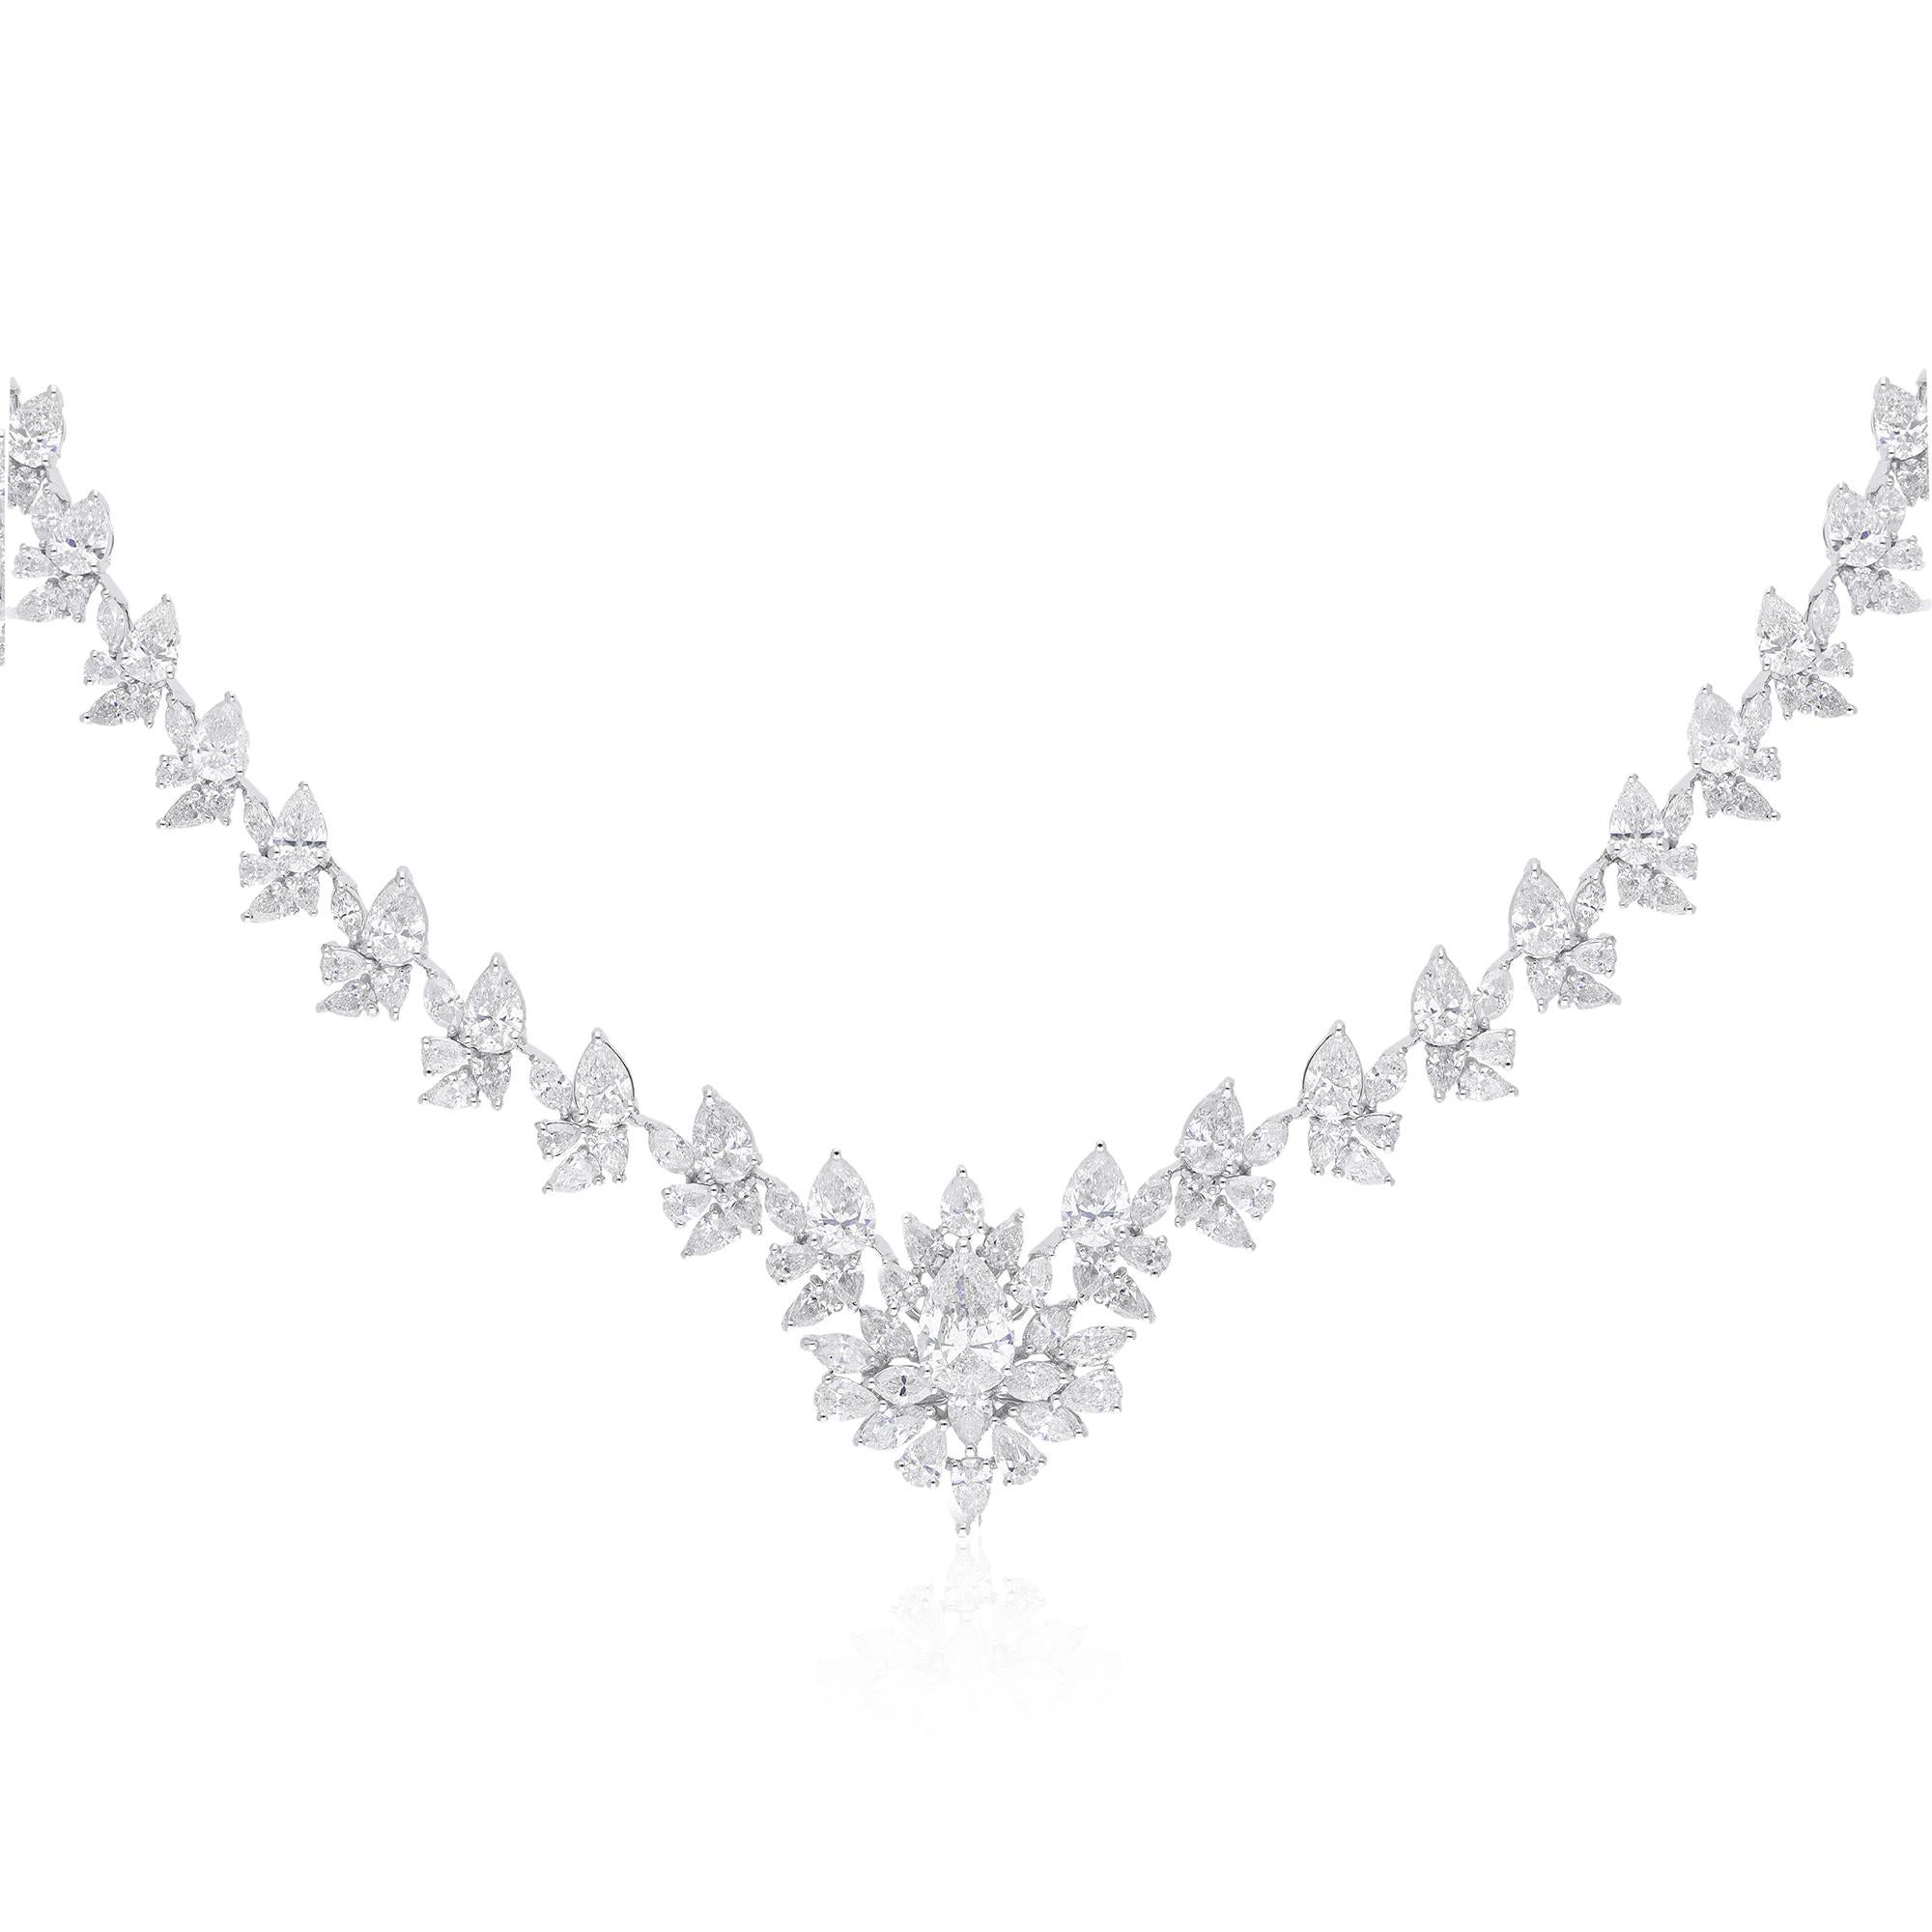 At its heart lies a stunning array of pear and marquise-cut diamonds, totaling an impressive 17.24 carats. Each diamond is carefully selected for its exceptional clarity, brilliance, and fire, radiating a mesmerizing sparkle that captivates the